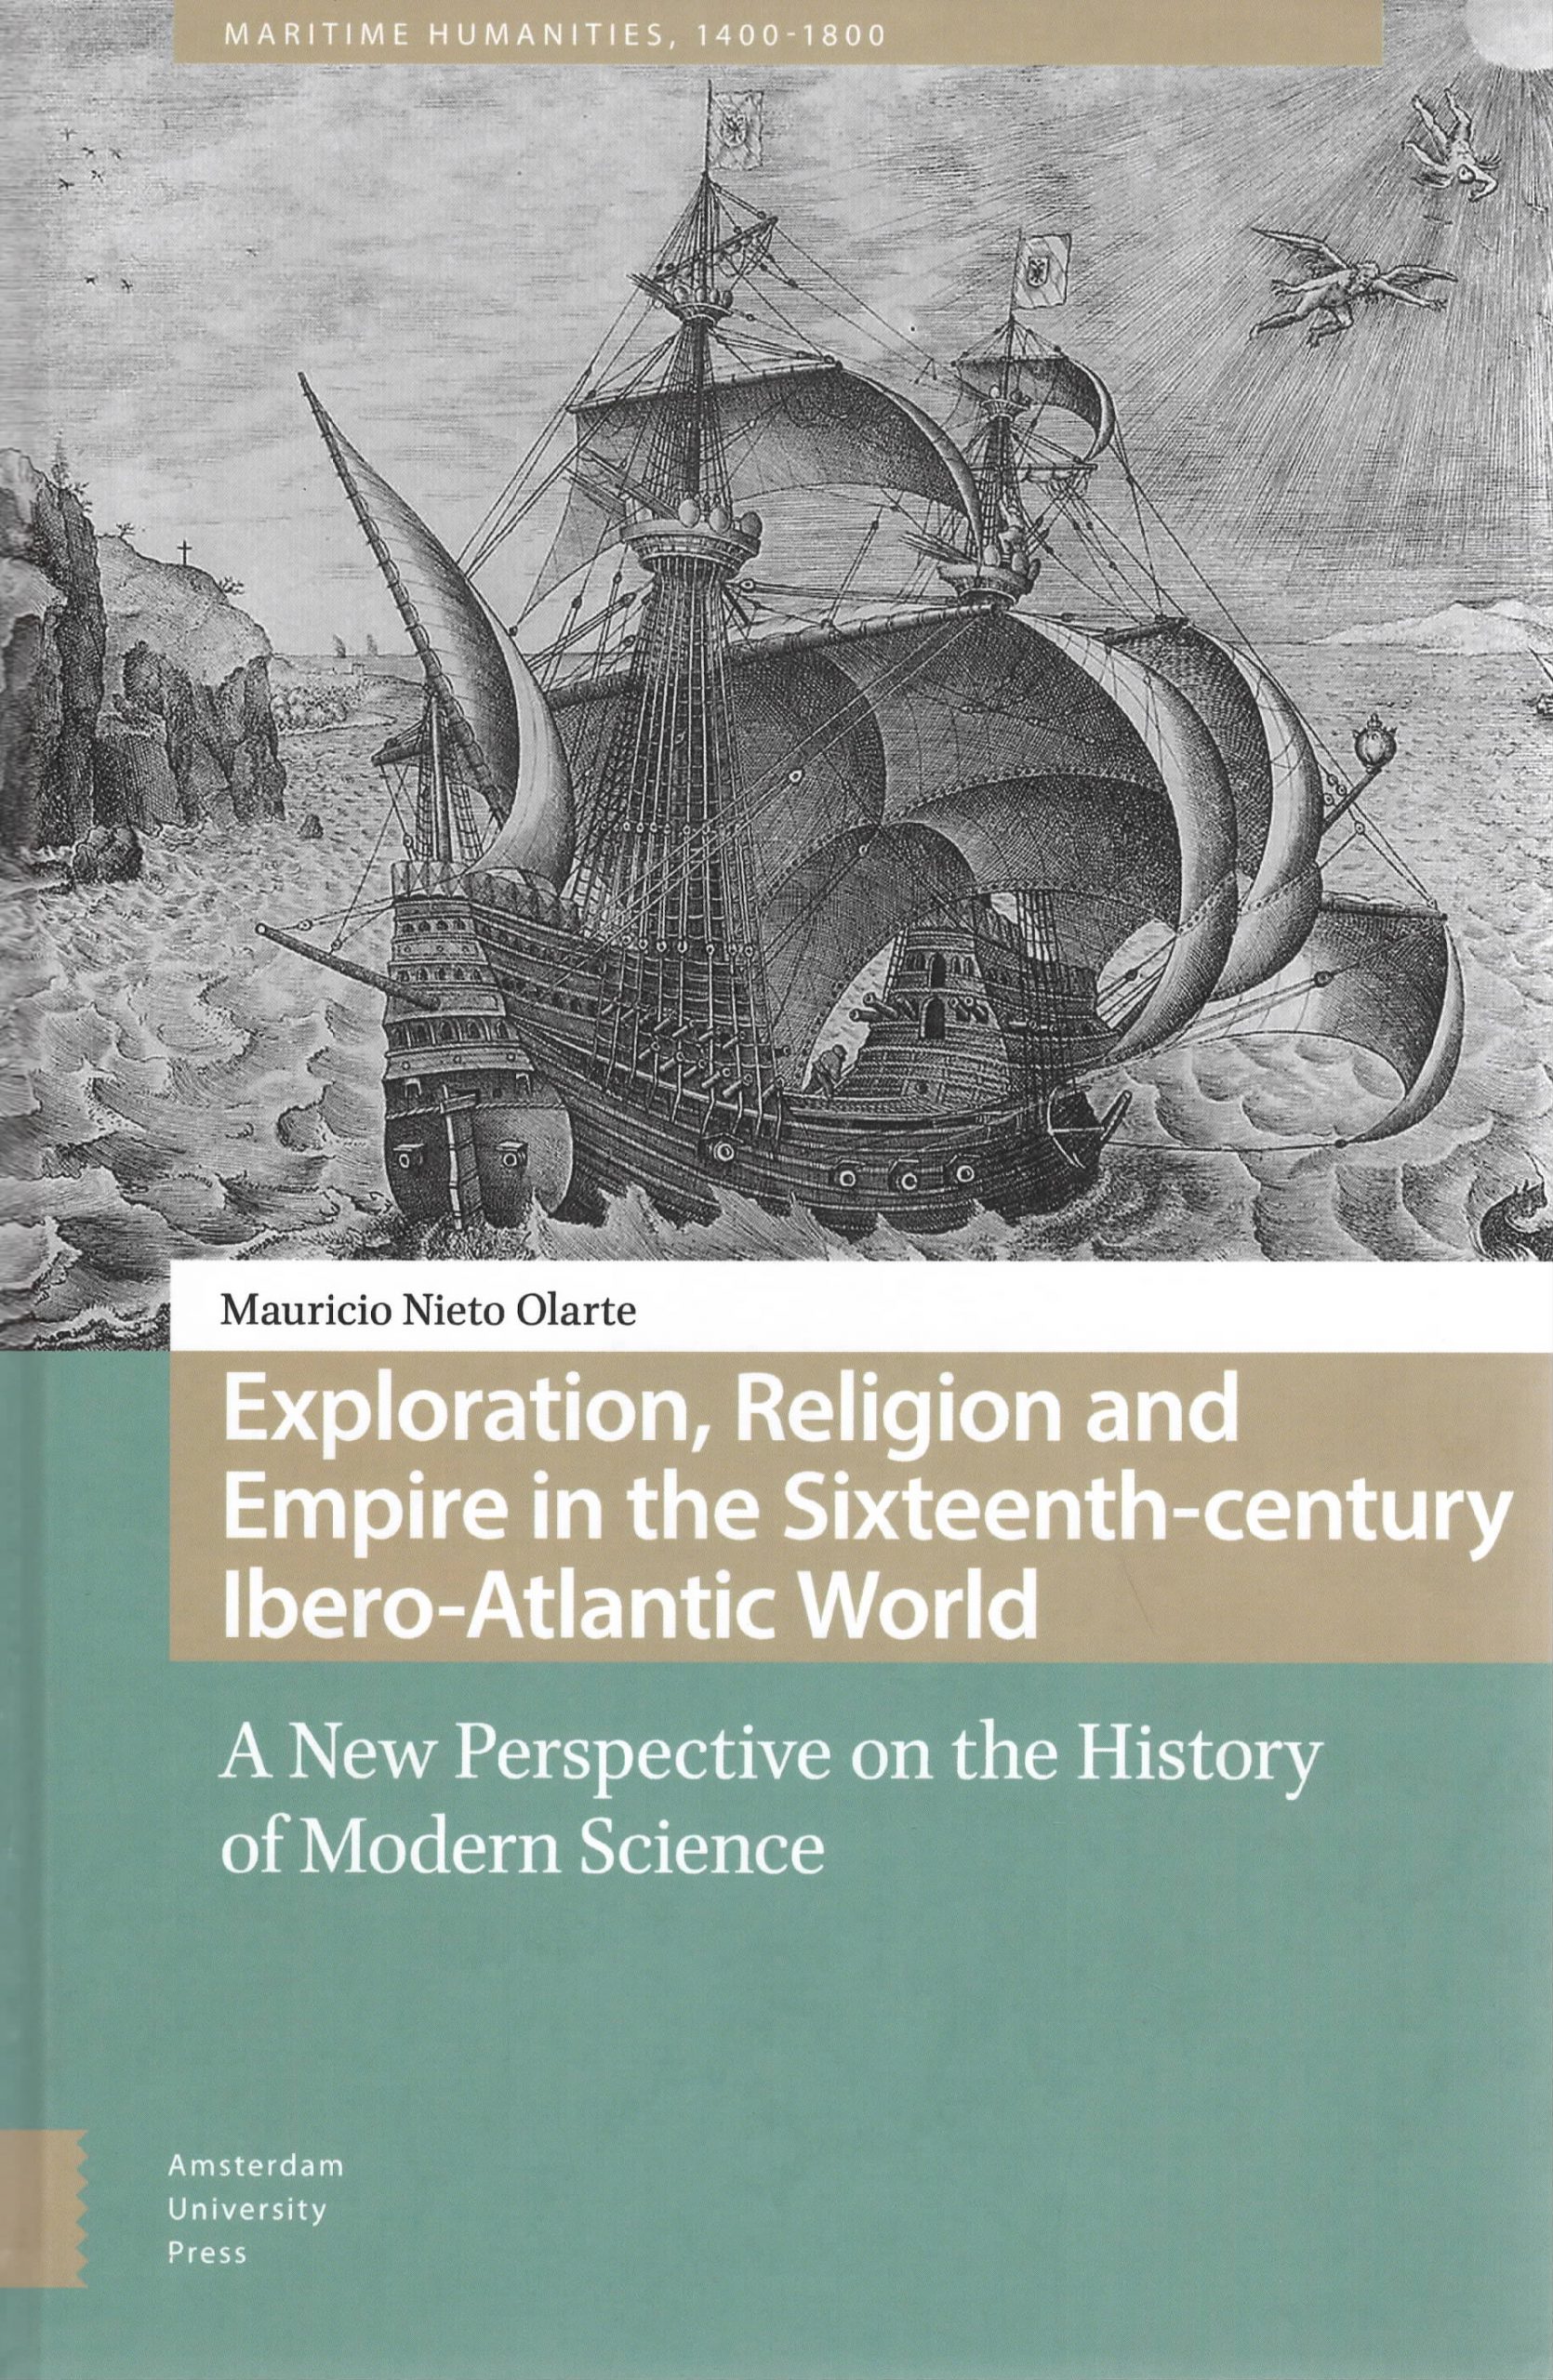 Exploration, religion, and empire in the sixteenth-century ibero-atlantic world: a new perspective on the history of modern science￼